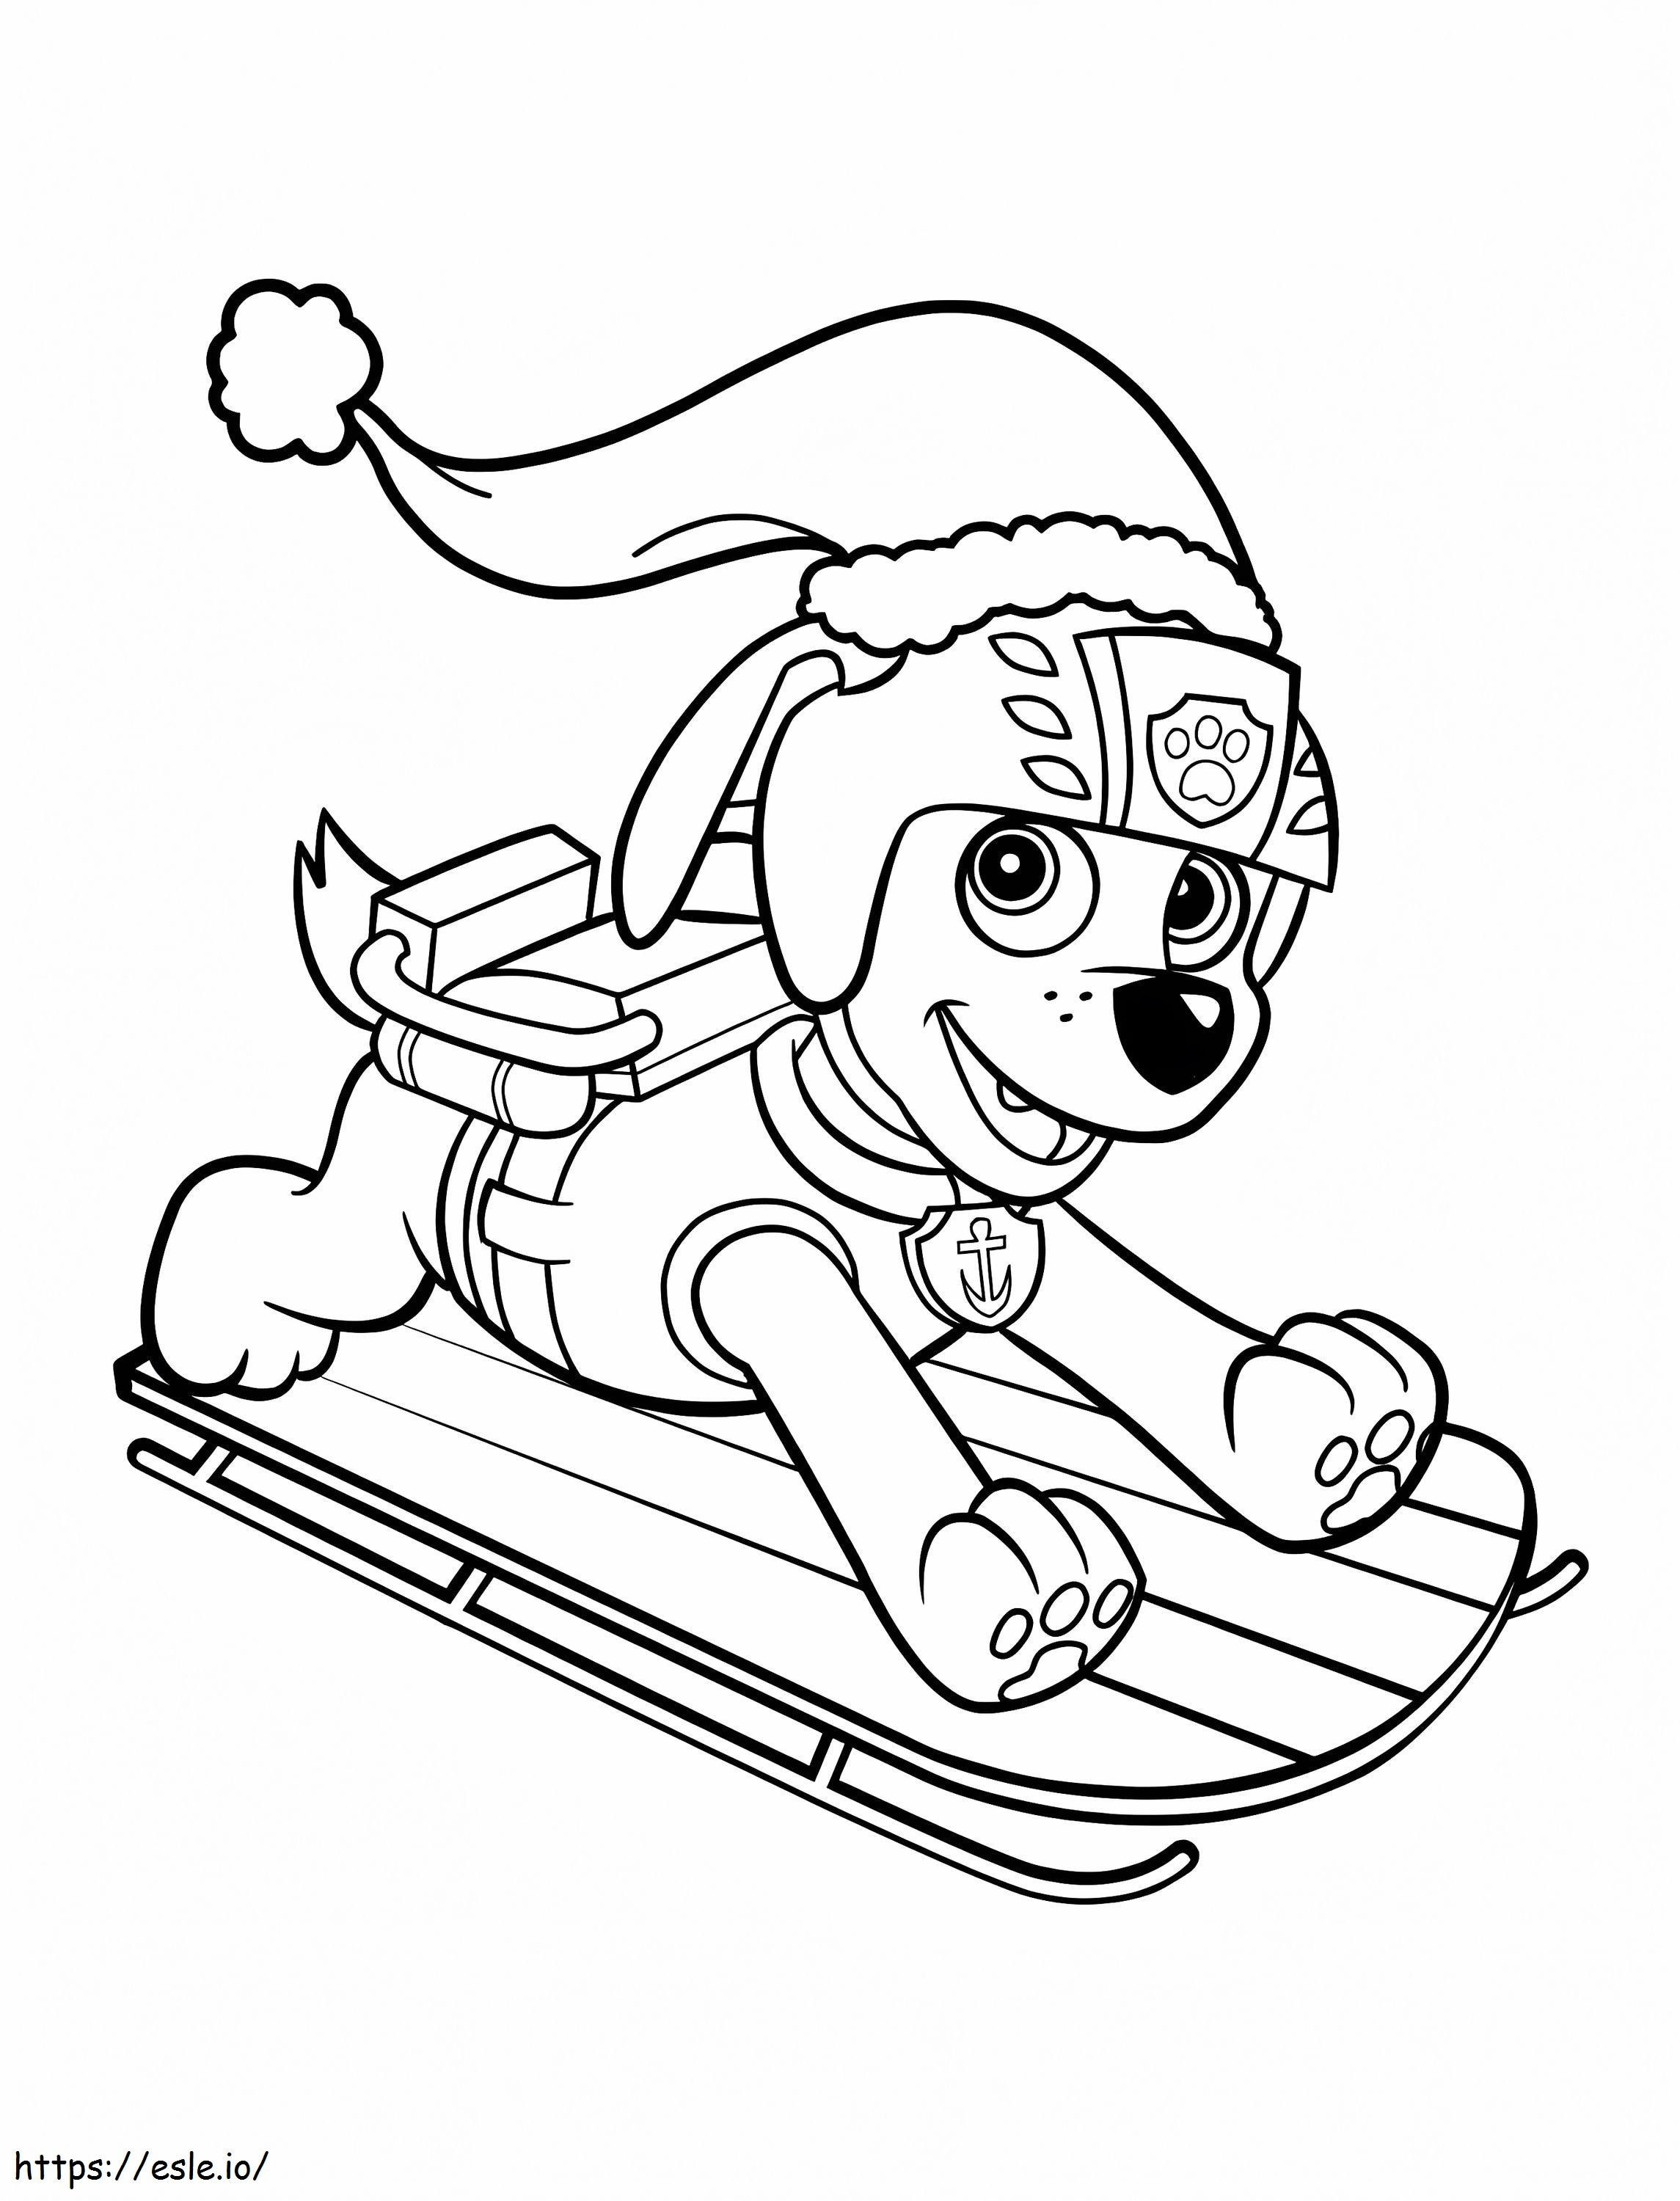 Zuma From Paw Patrol coloring page